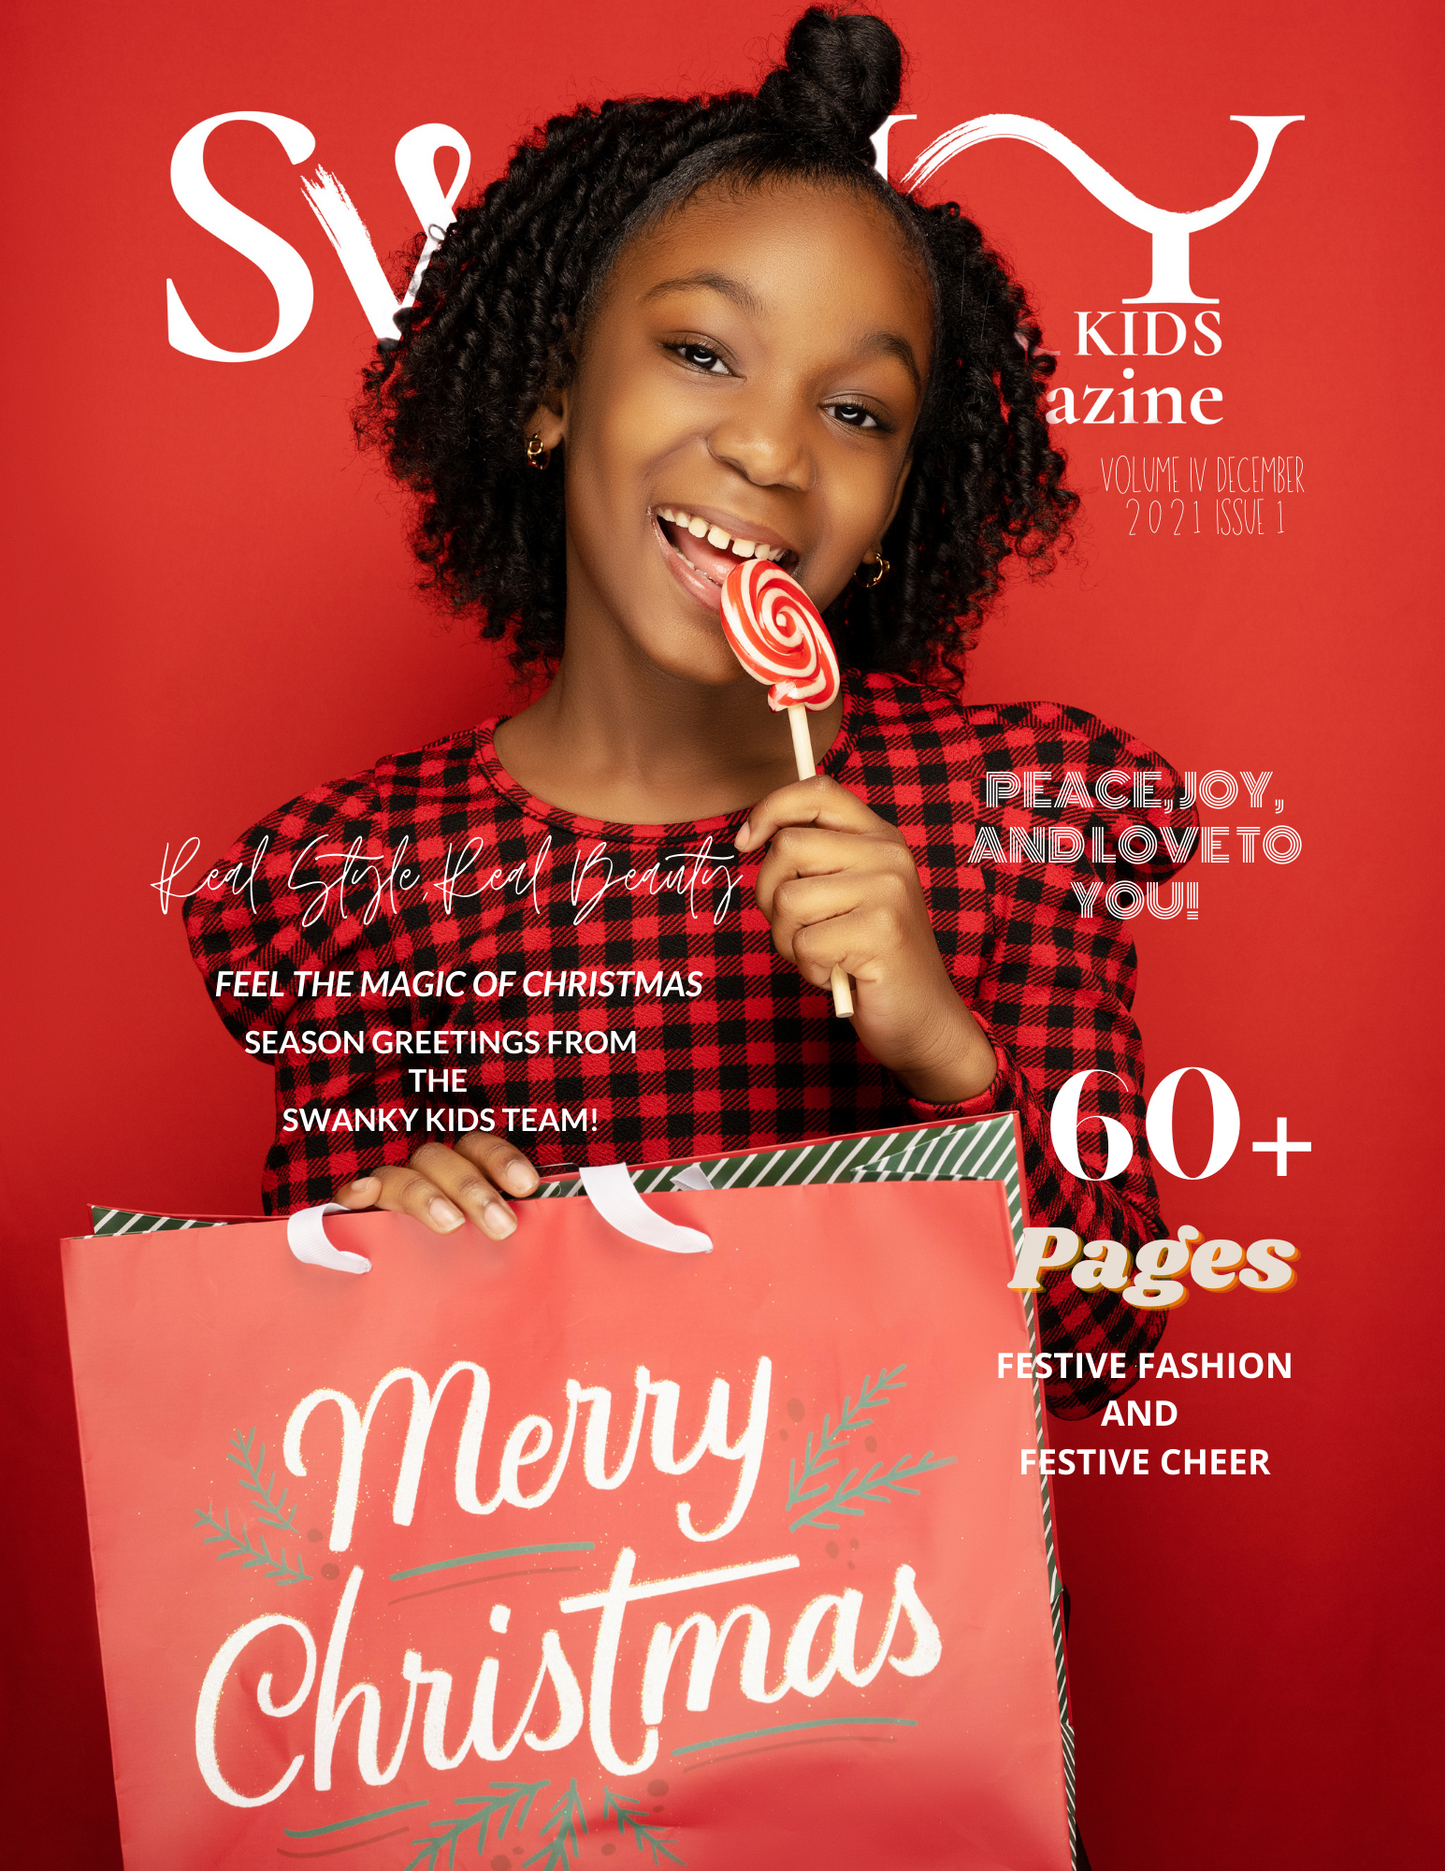 Swanky Kids Christmas Special VOL IV Issue 1